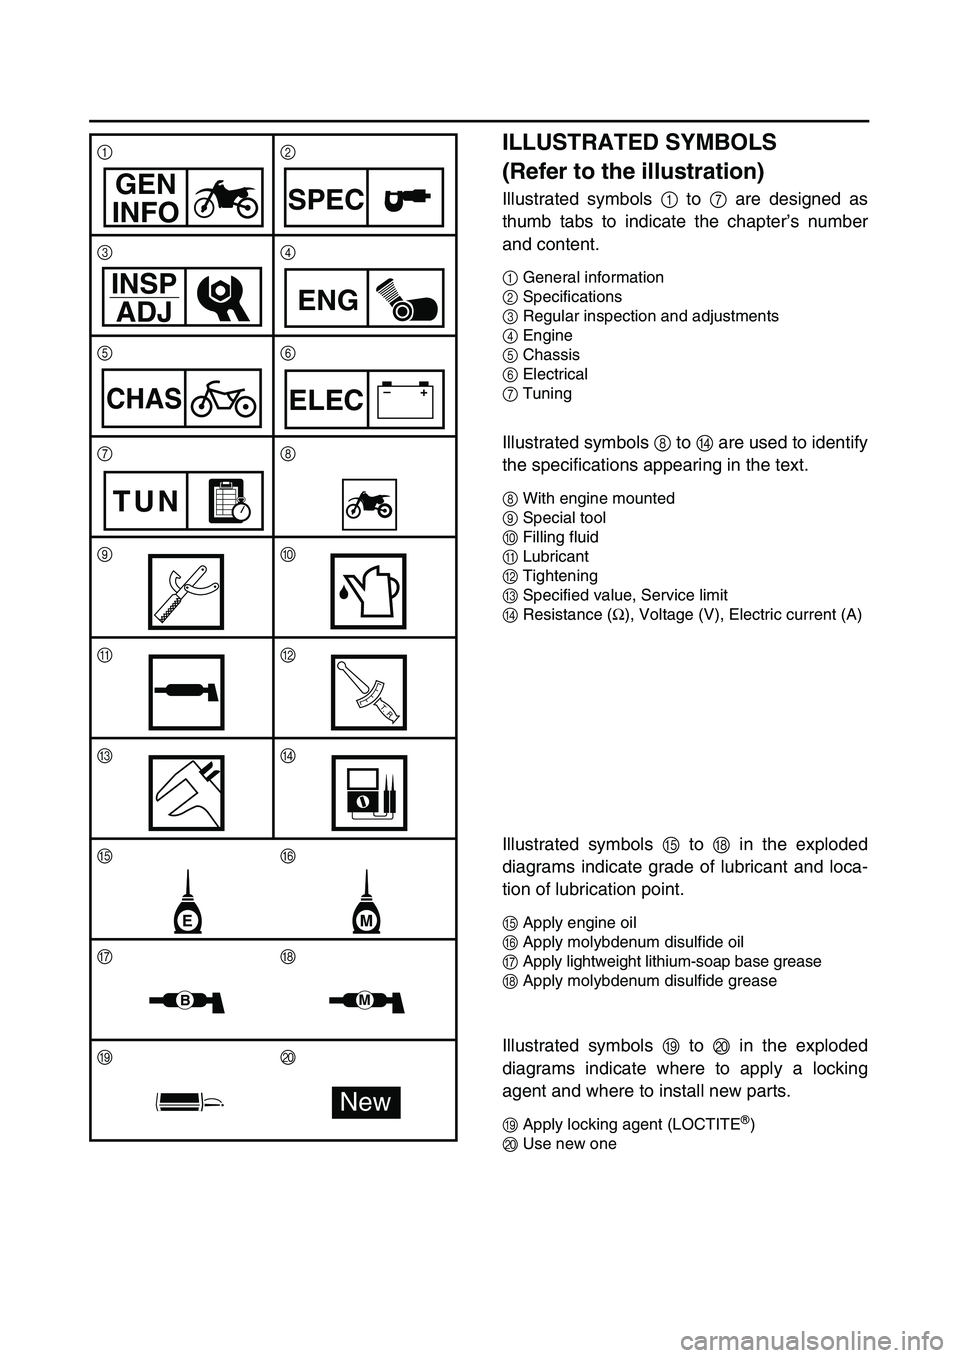 YAMAHA WR 426F 2002  Manuale de Empleo (in Spanish)  
ILLUSTRATED SYMBOLS 
(Refer to the illustration) 
Illustrated symbols   
1  
 to   
7  
 are designed as
thumb tabs to indicate the chapter’s number
and content. 
1  
General information  
2  
Spe